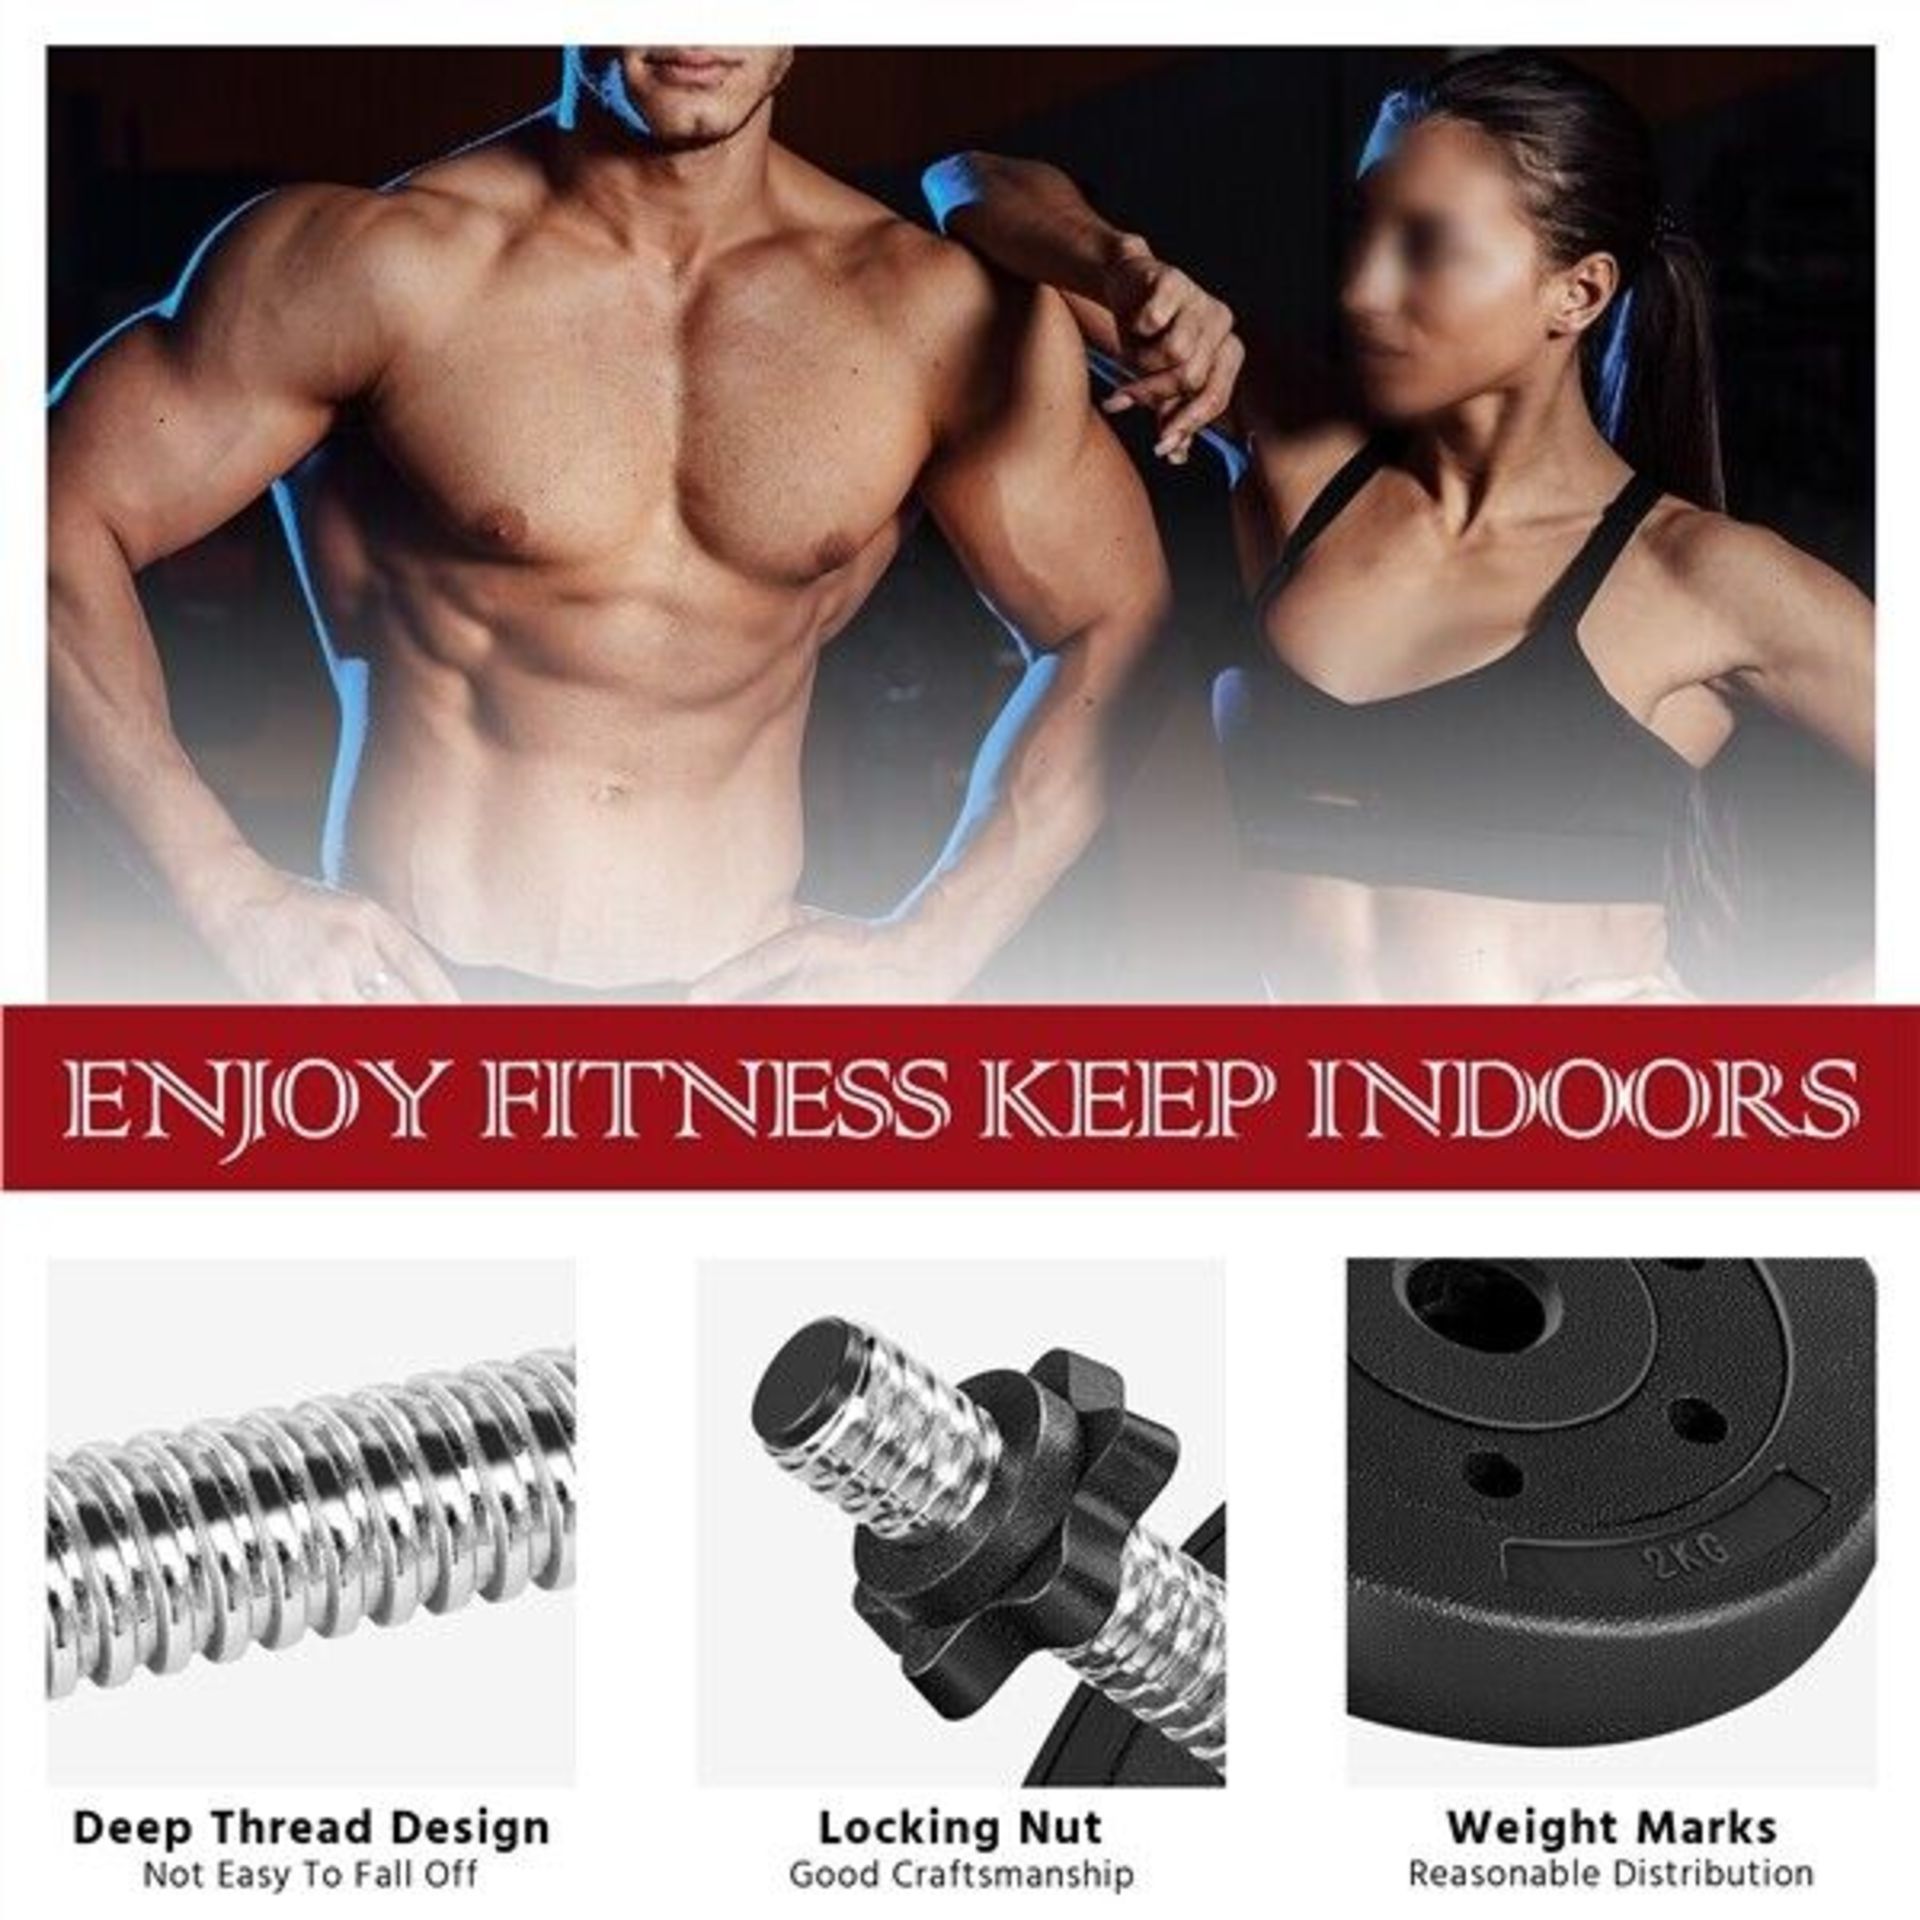 5 x SETS OF 2 - 20KG ADJUSTABLE WEIGHT DUMBBELL SETS. EACH SET INCLUDES: 4 X 3KG WEIGHTS, 2 X 2. - Image 5 of 8